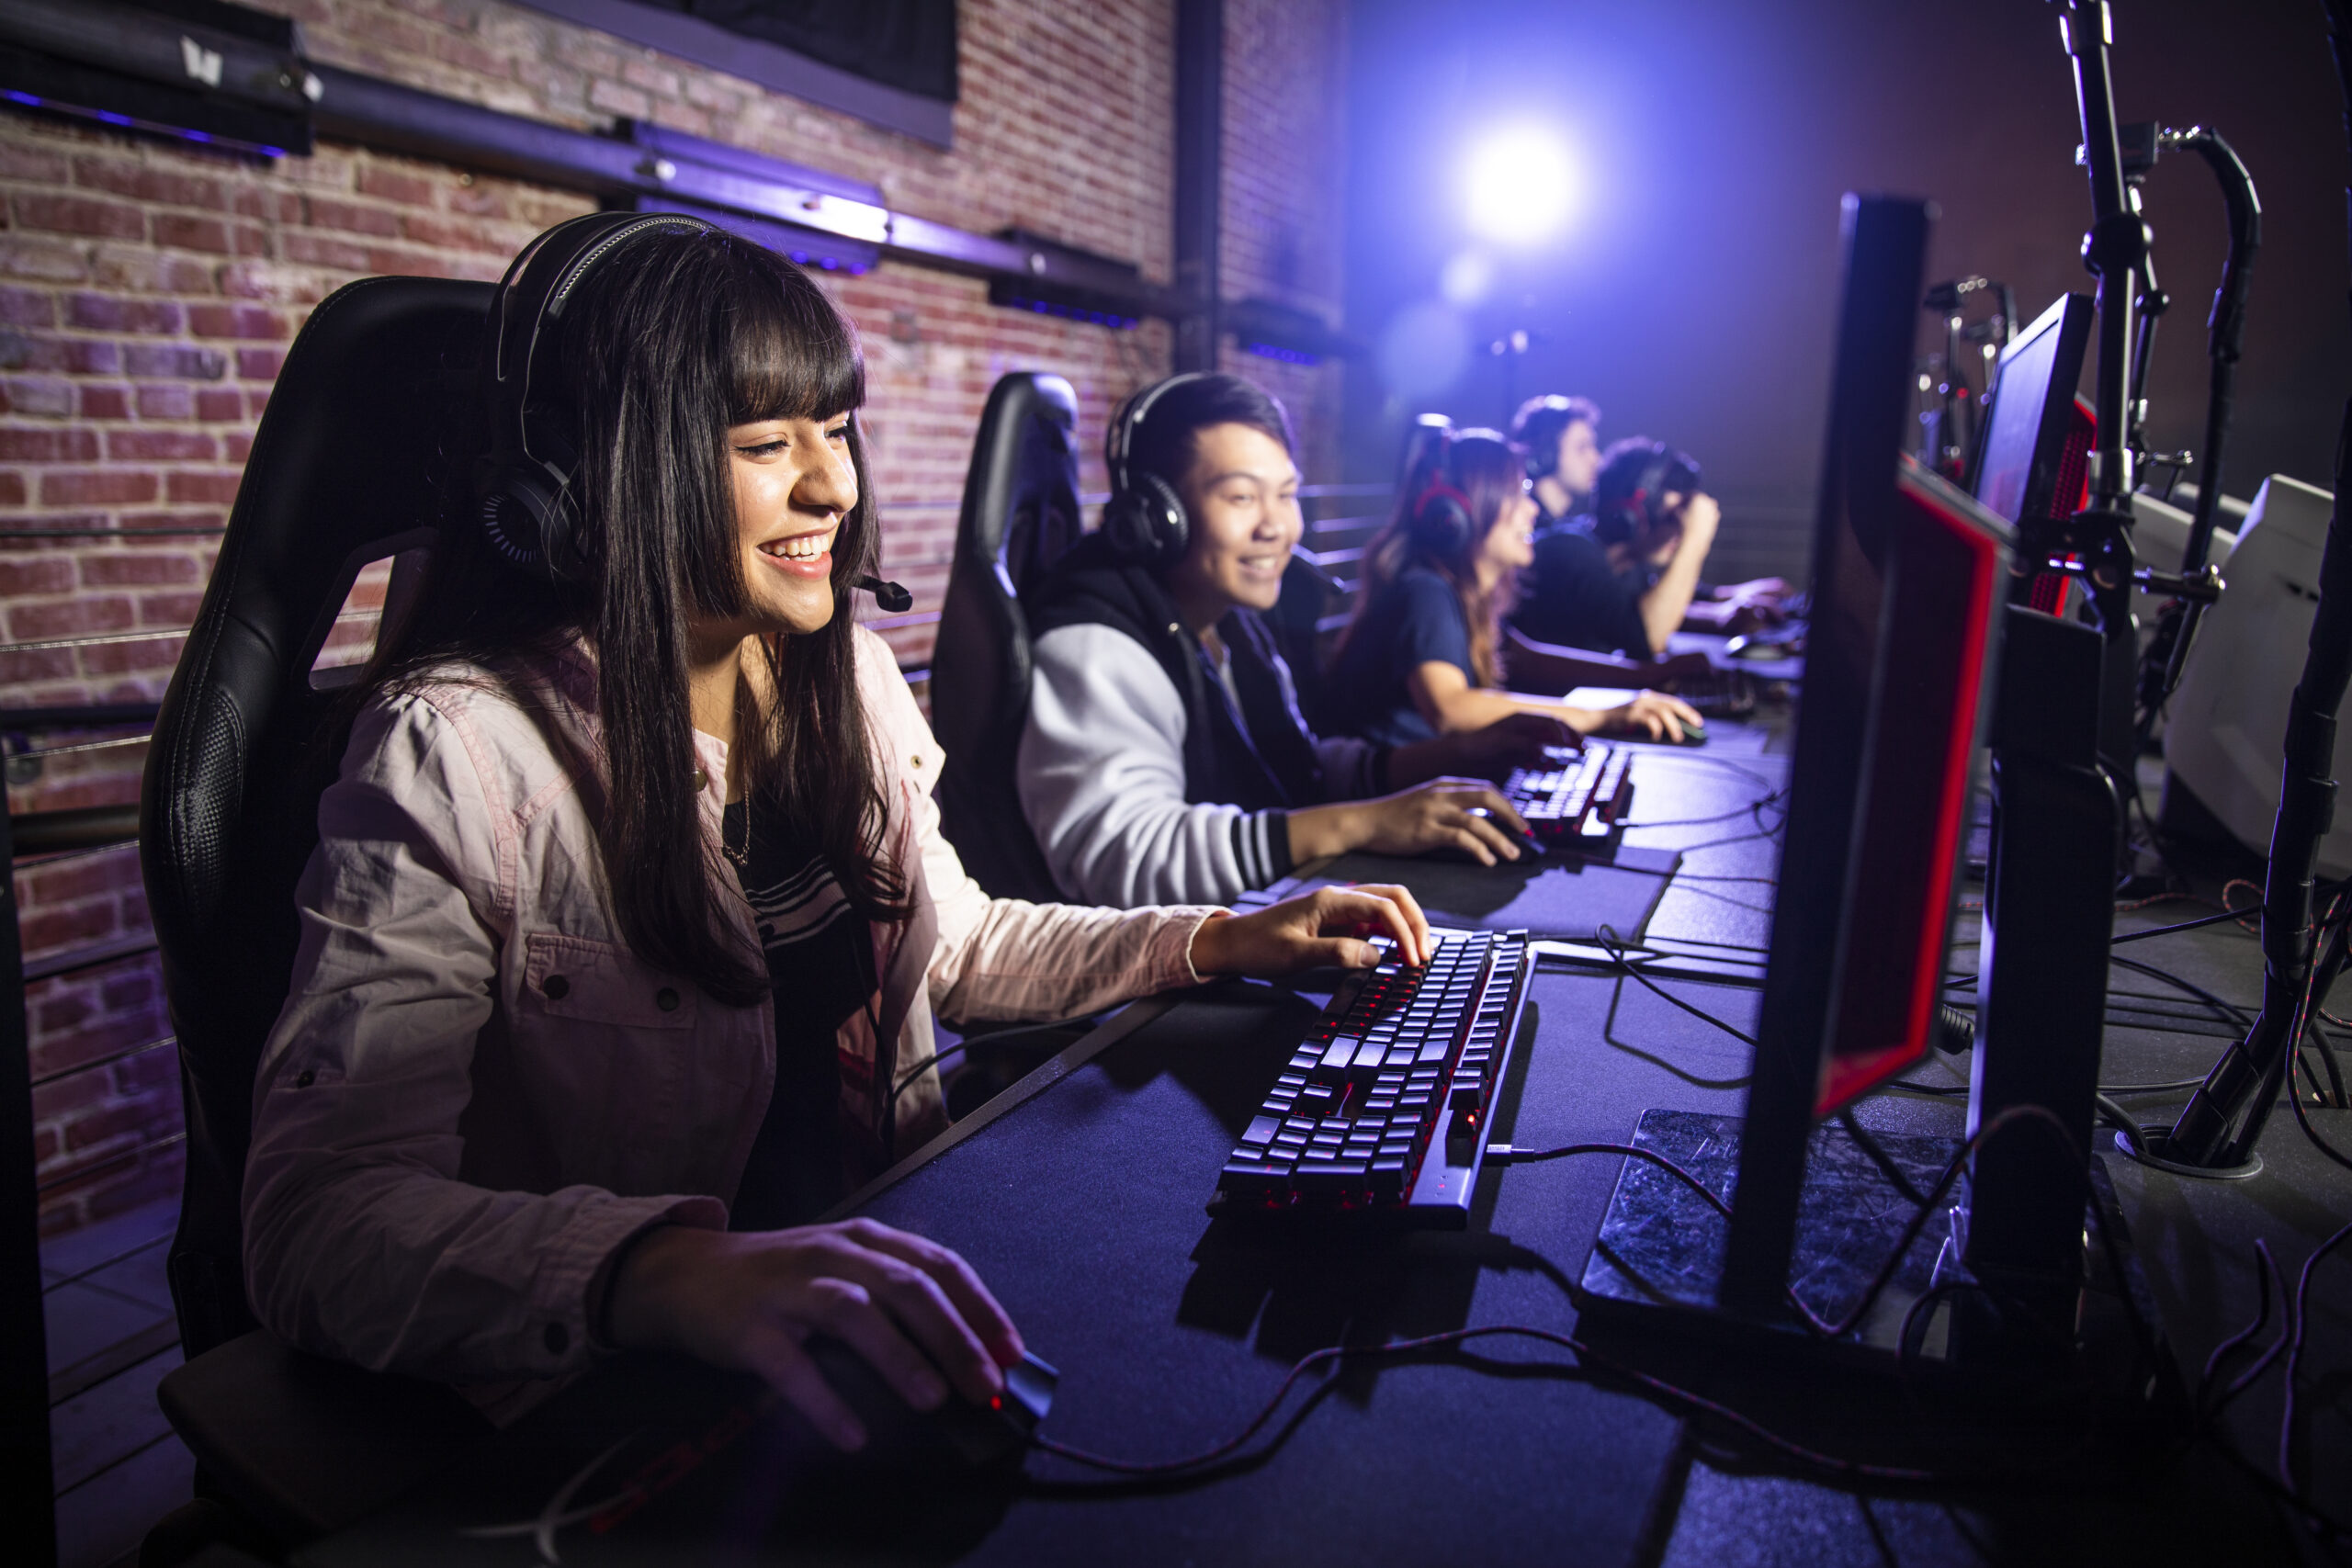 Why Marketers Should Embrace the Female Gaming Culture | Quantcast